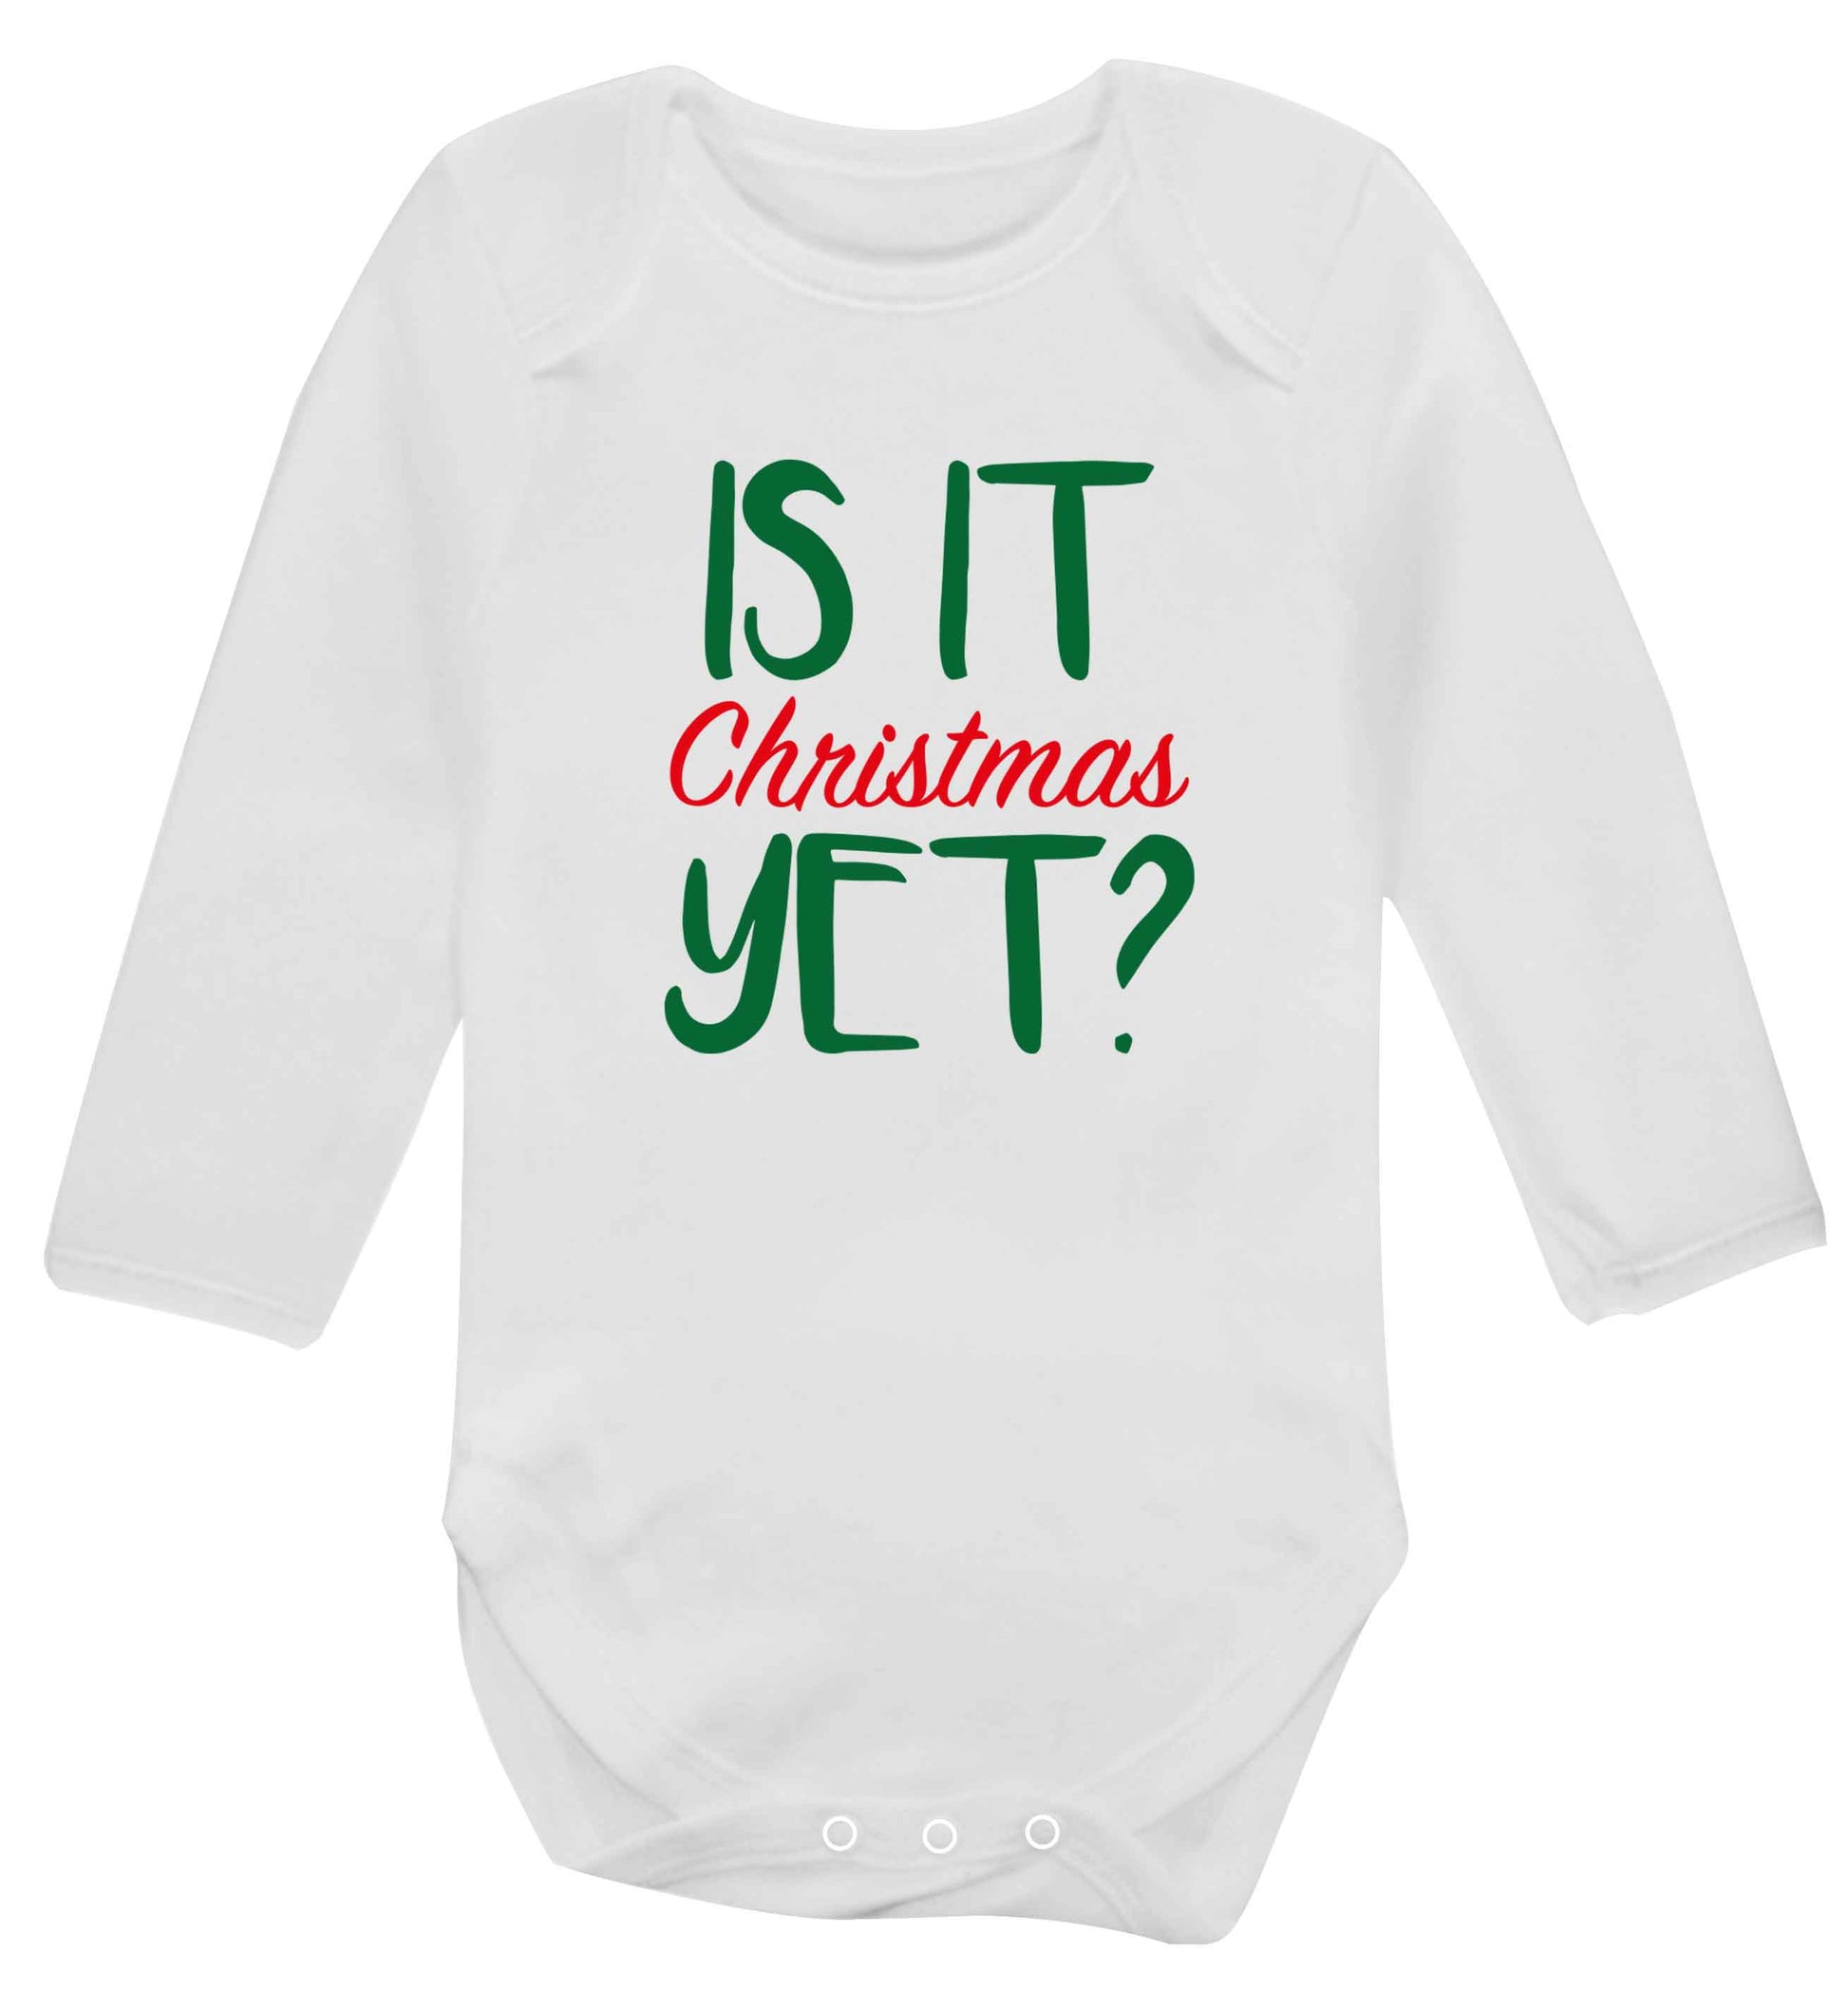 Is it Christmas yet? baby vest long sleeved white 6-12 months